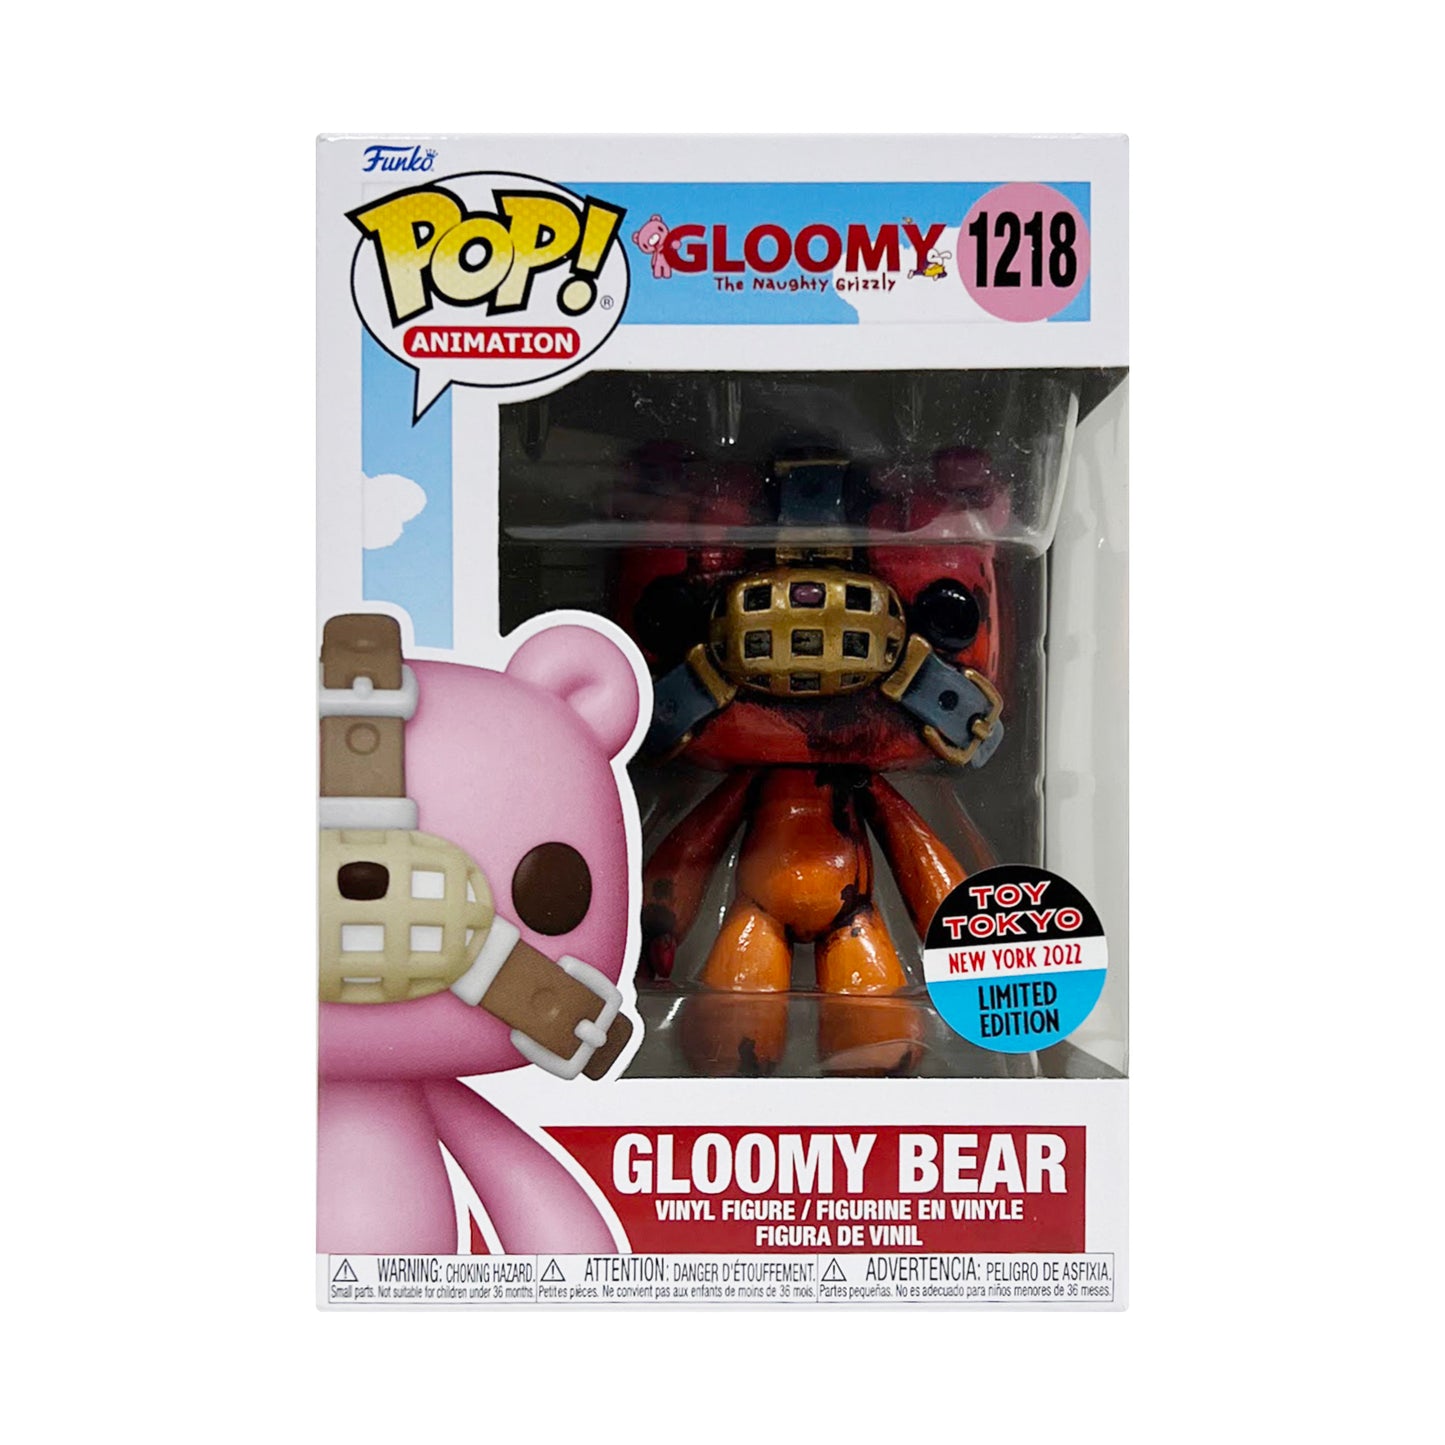 Funko Pop! Animation: Gloomy Bear 12 Toy Tokyo Exclusive Hand-Painted by KLAV